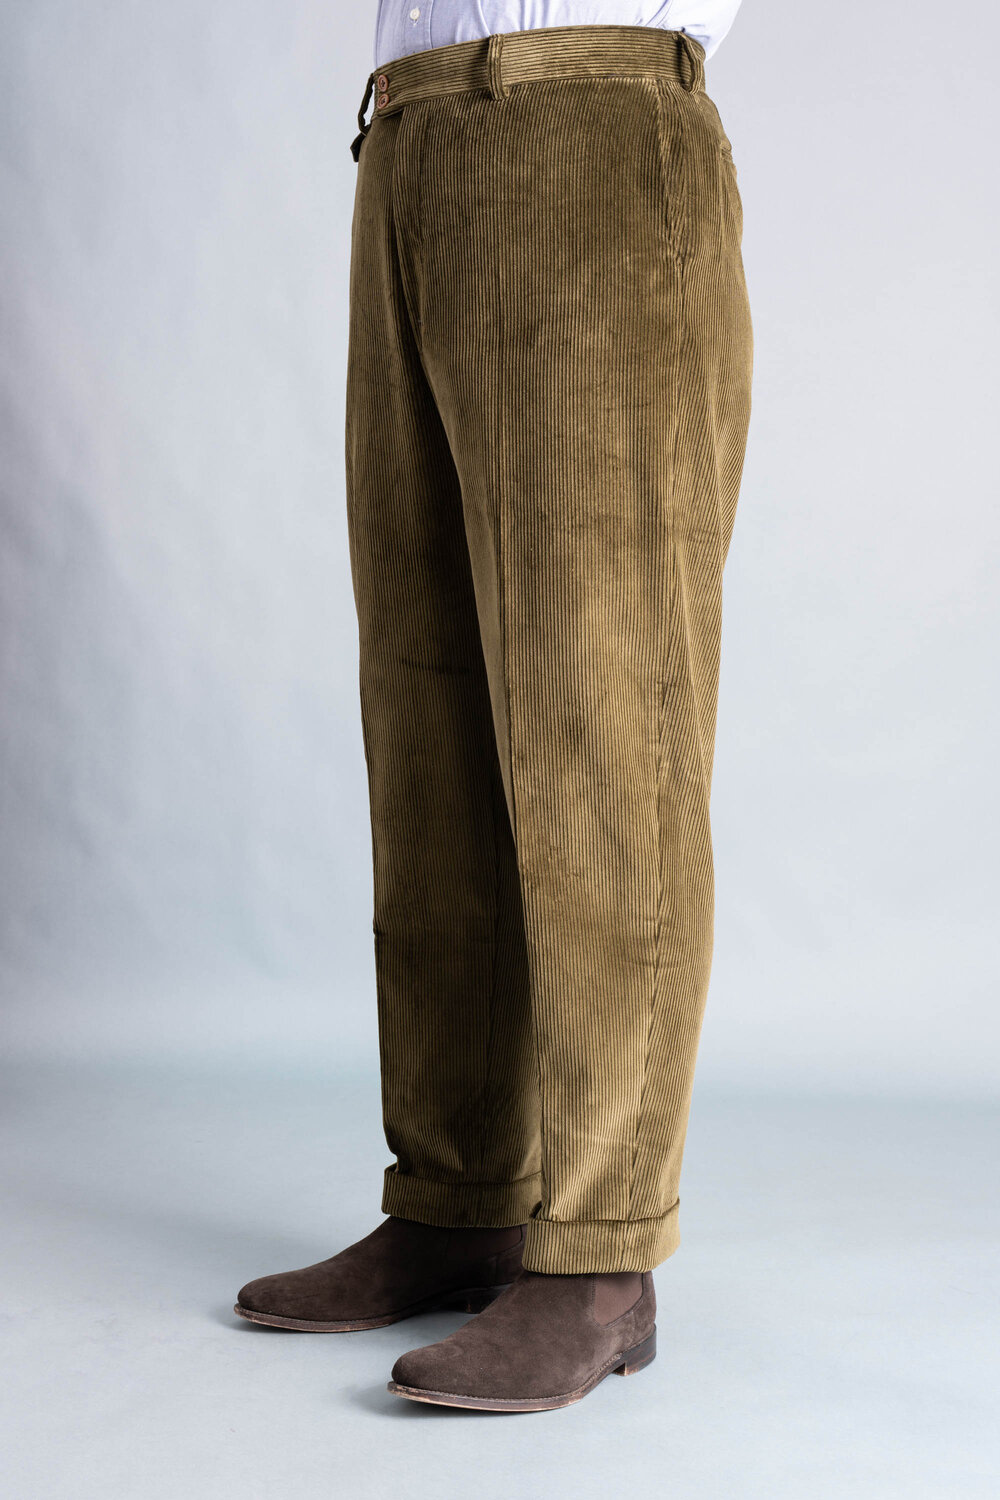 Left side angle front view of the Khaki Drab corduroy trousers.